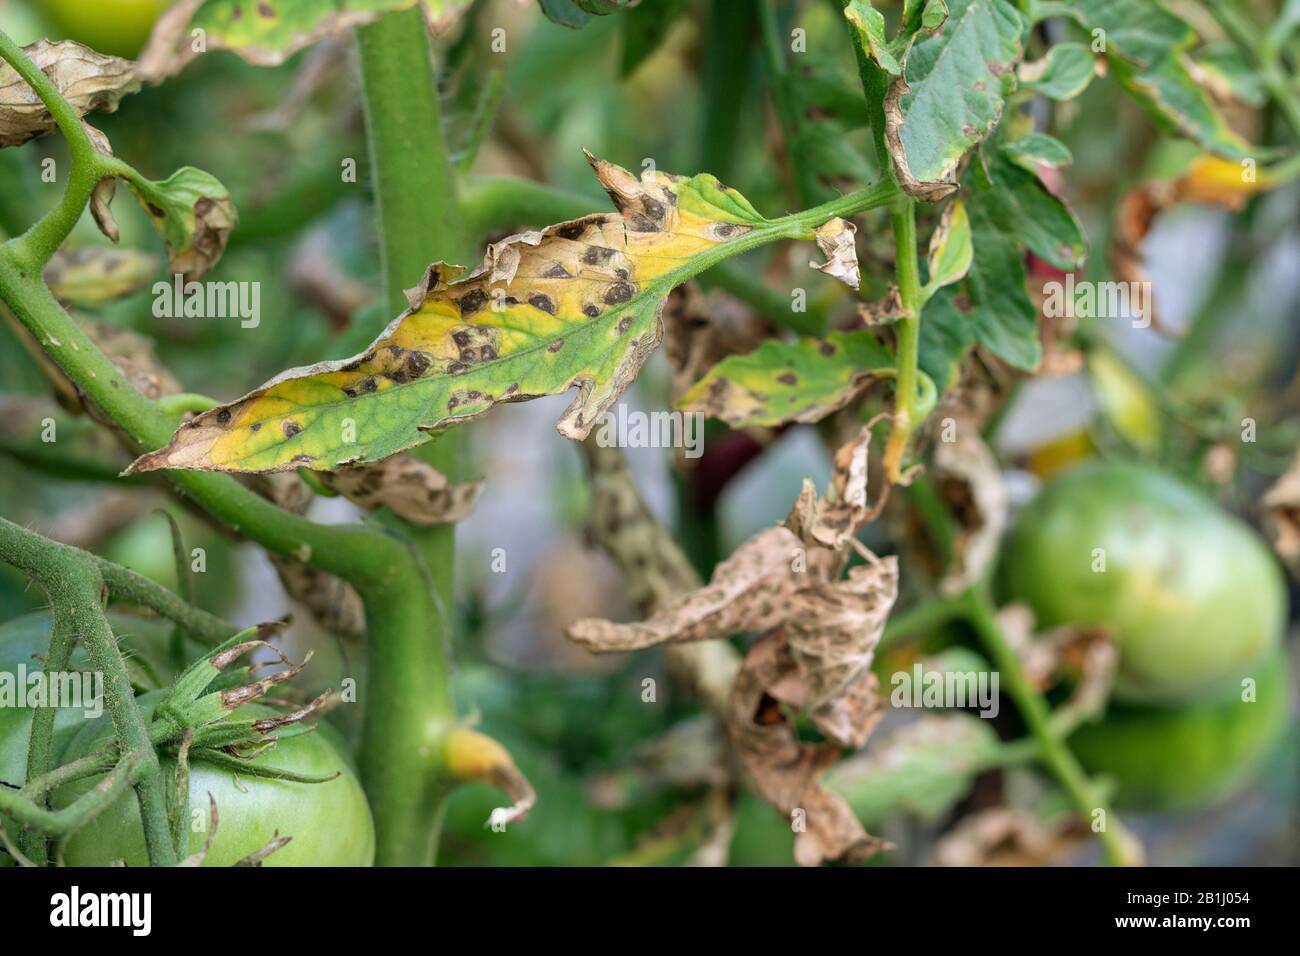 Tomato blight on maincrop foliage. fungal problem Phytophthora Infestans and is disease which causes spotting on late tomato leaves. Stock Photo